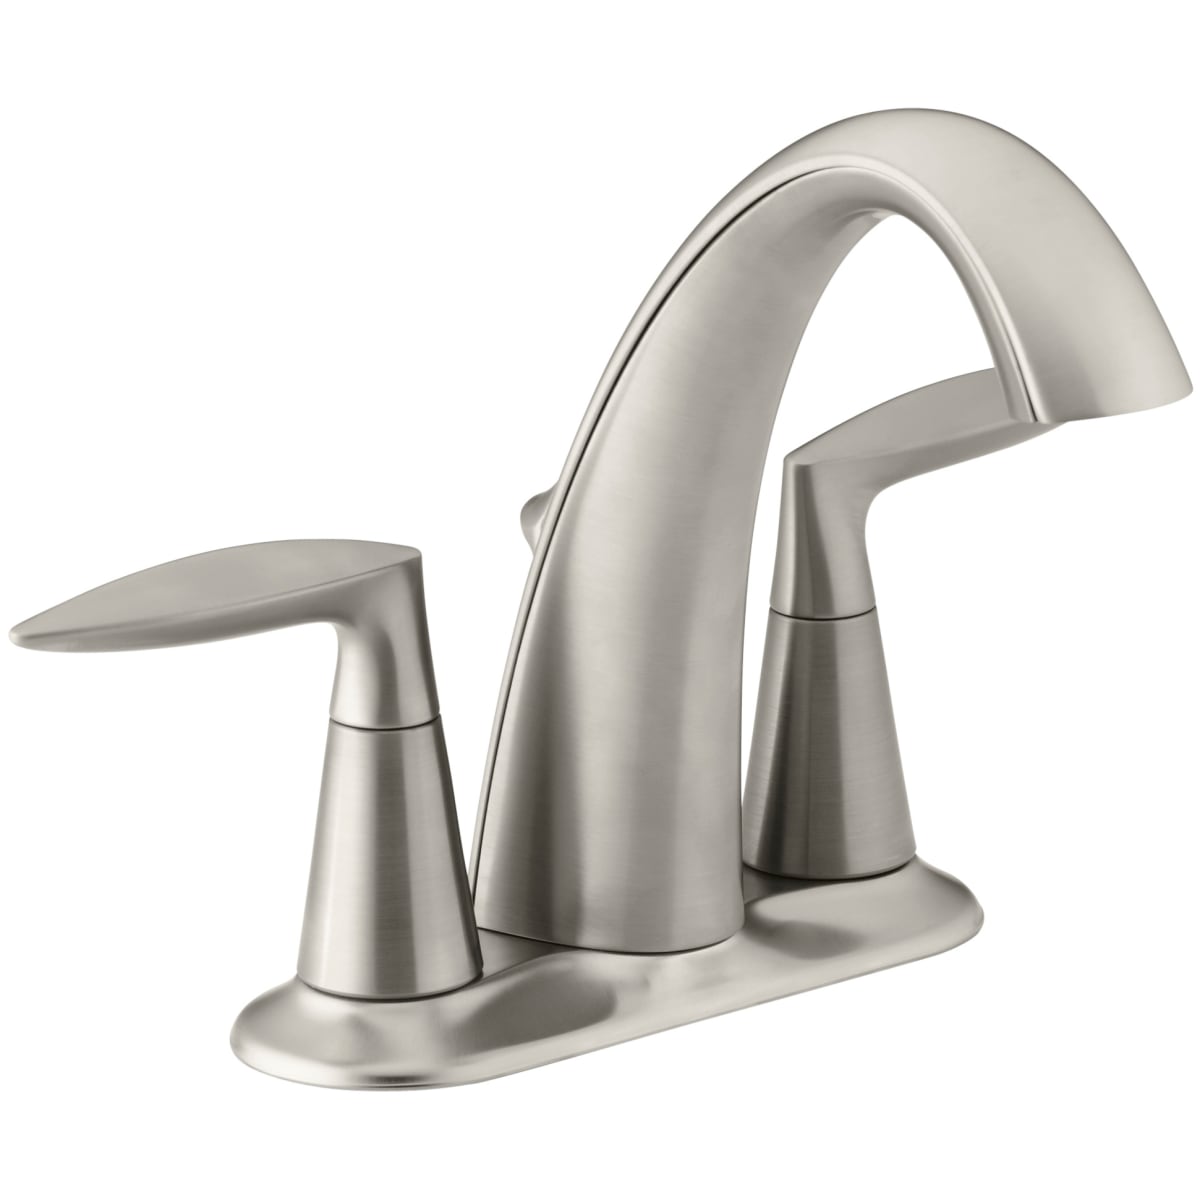 Kohler K-45100-4-BN Vibrant Brushed Nickel Alteo Centerset Bathroom Faucet  Free Metal Pop-Up Drain Assembly with purchase